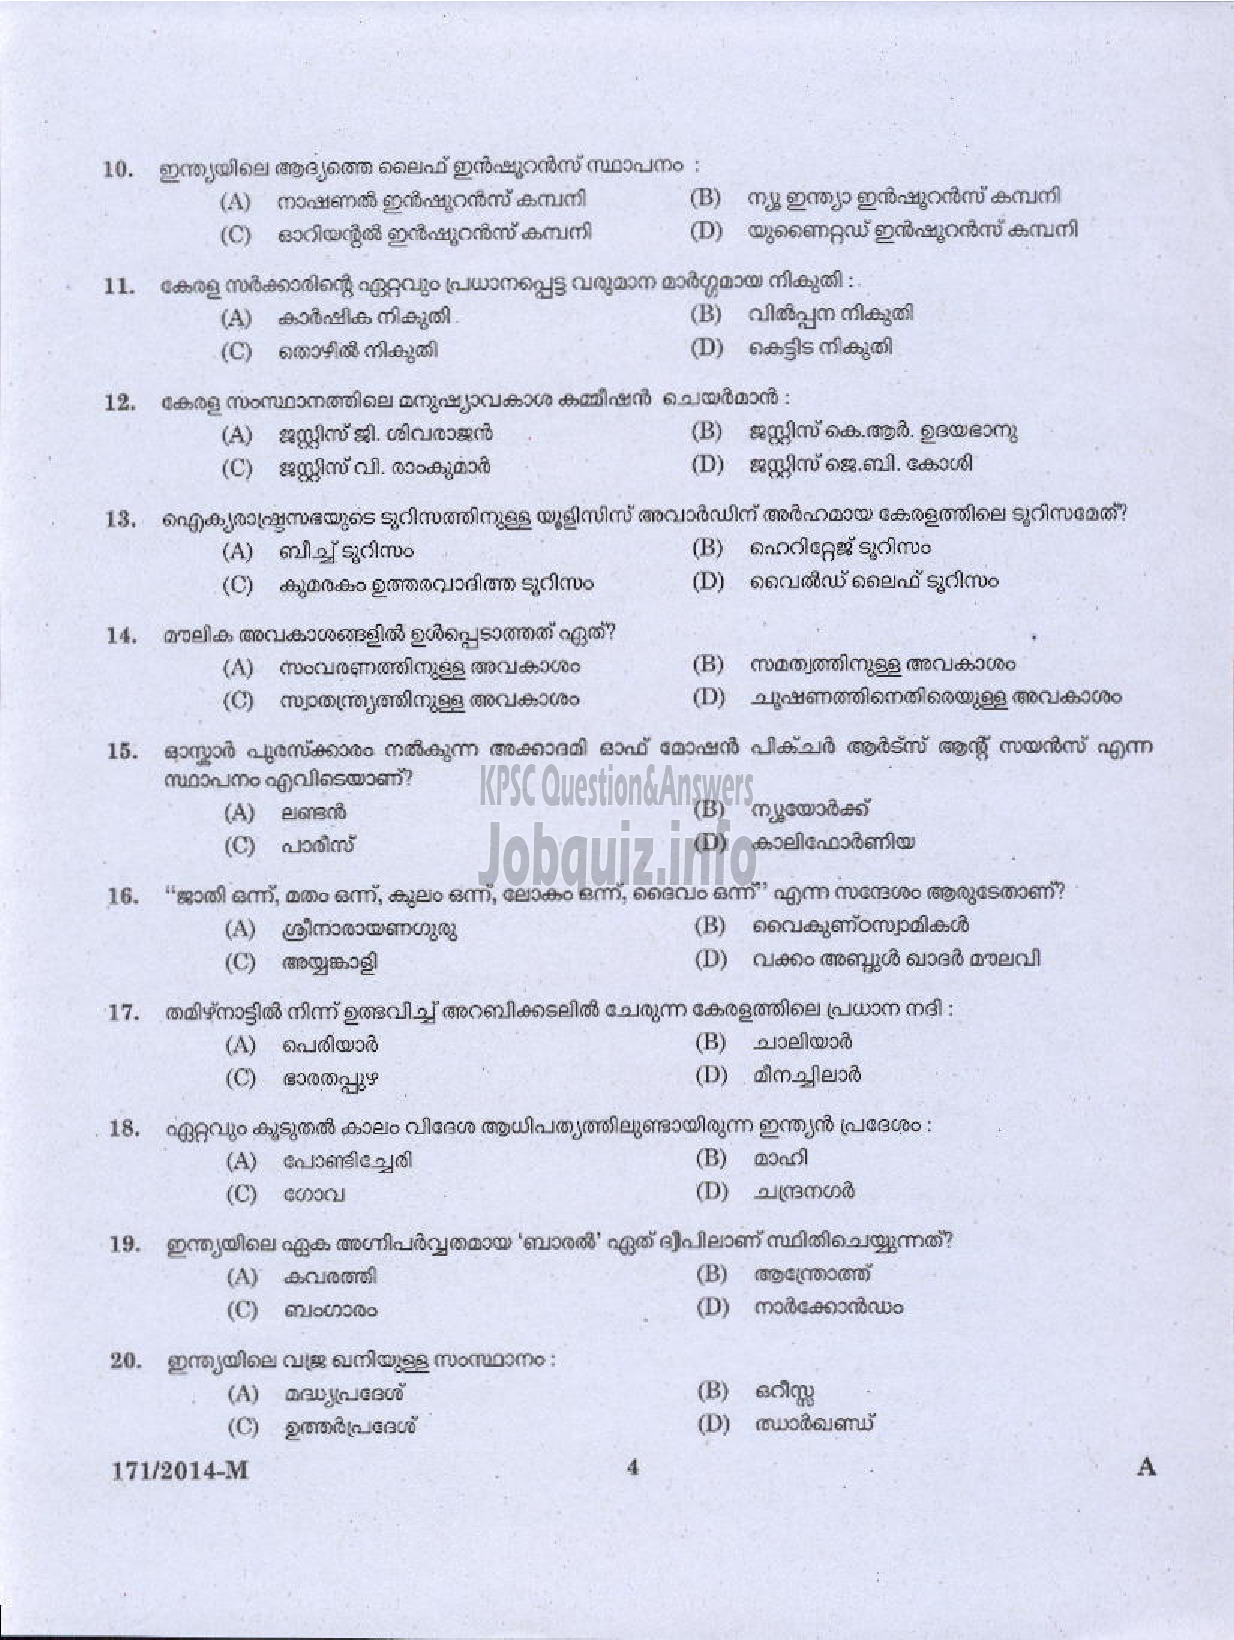 Kerala PSC Question Paper - DRIVER GR II KERALA ELECTRICAL AND ALLIED ENGINEERING COMPANY LTD ( Malayalam ) -2